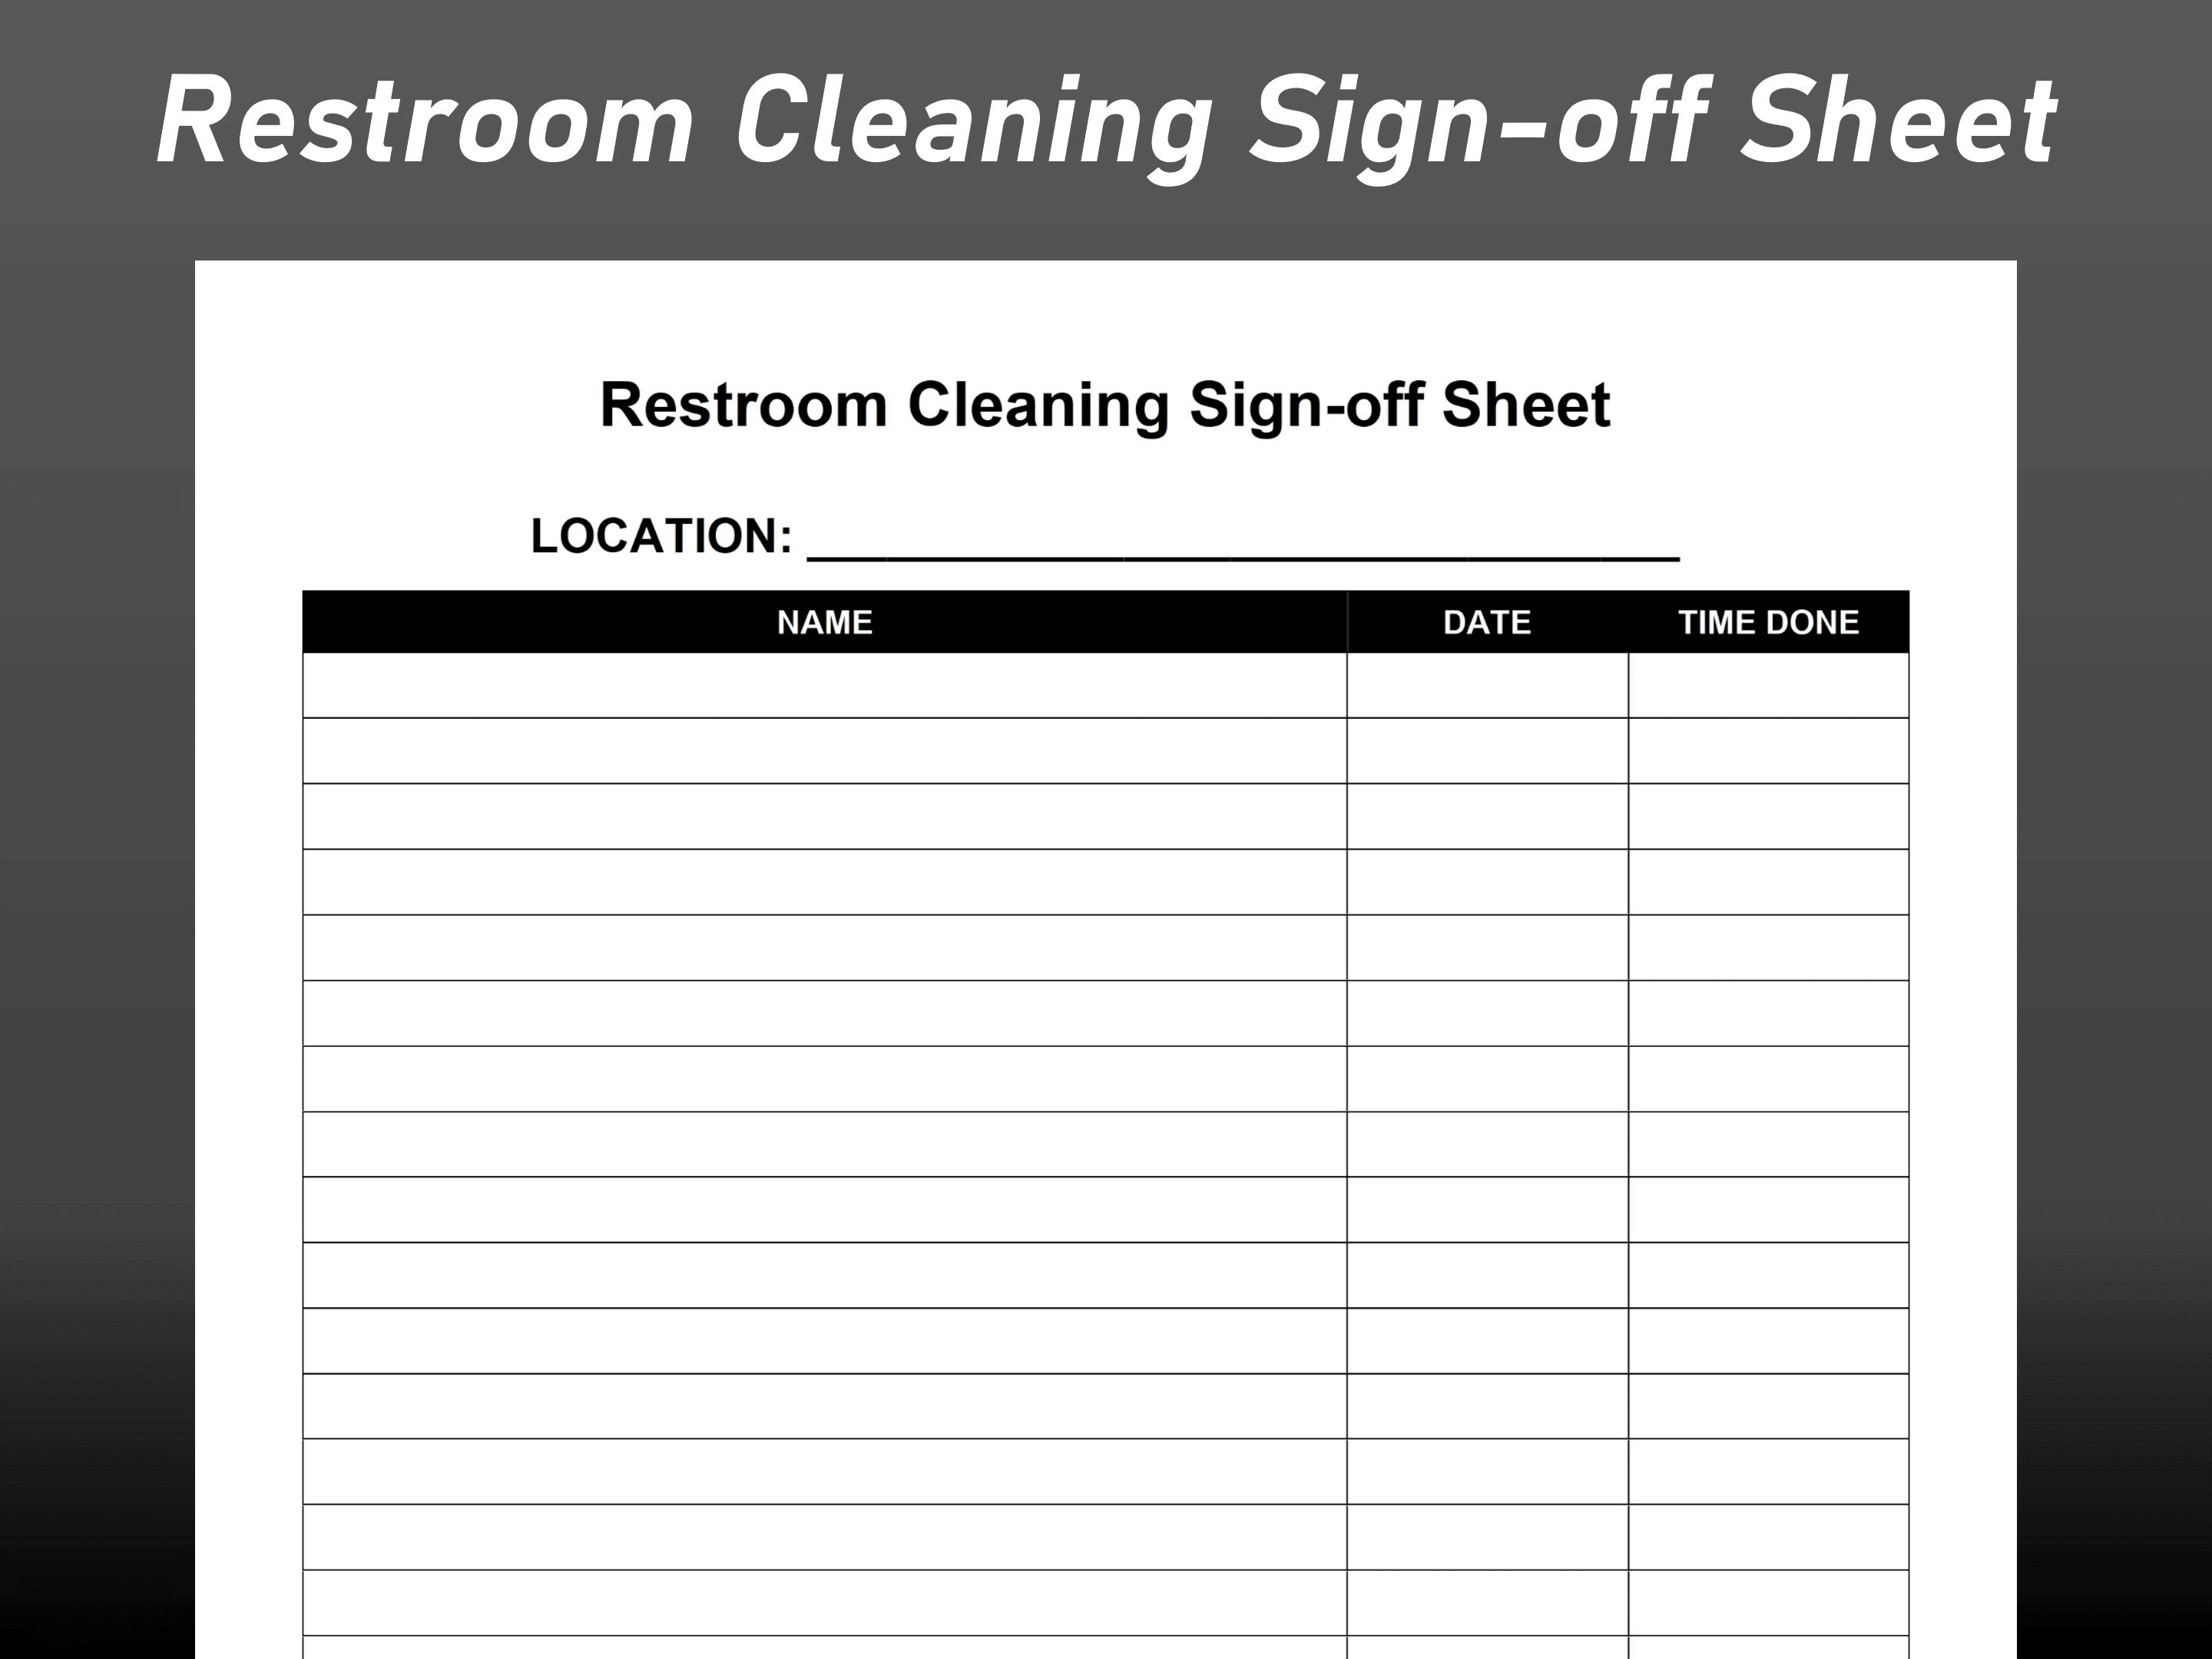 Restroom Cleaning Signoff Sheet, Employees Bathroom Cleaning Schedule